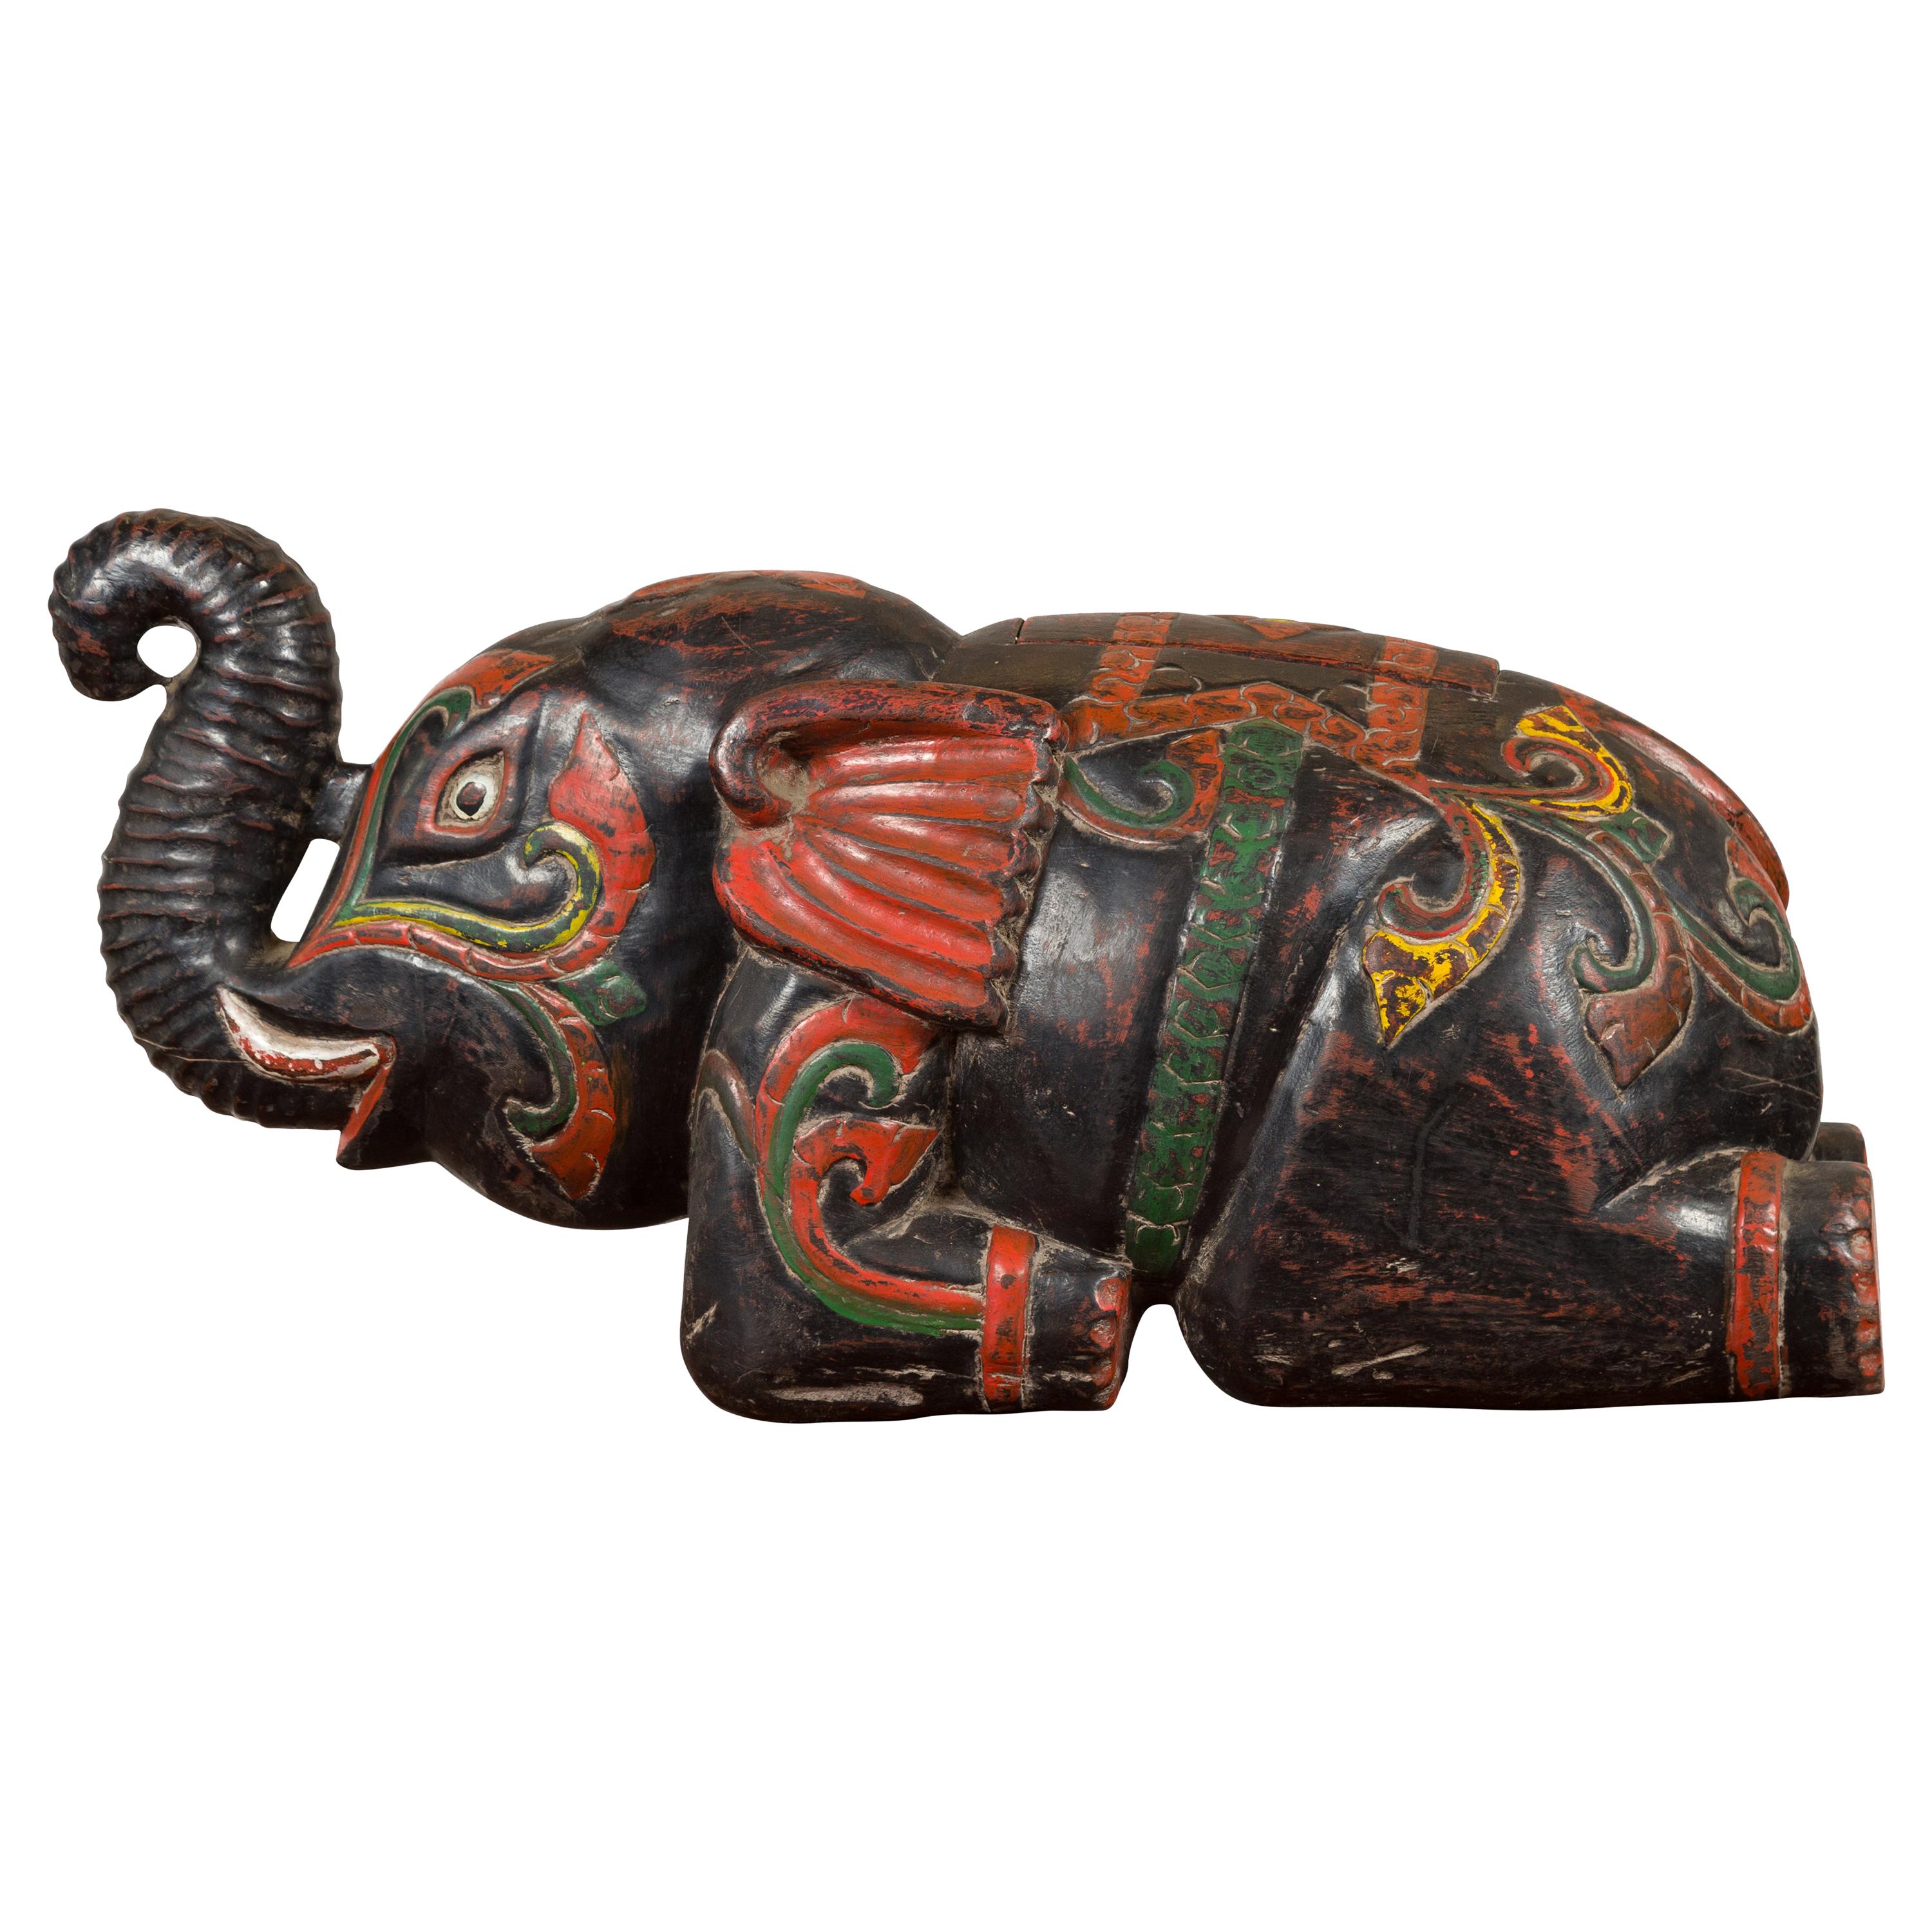 Handmade Asian Elephant Sculpture with Incised Decor and Multi-Color Finish